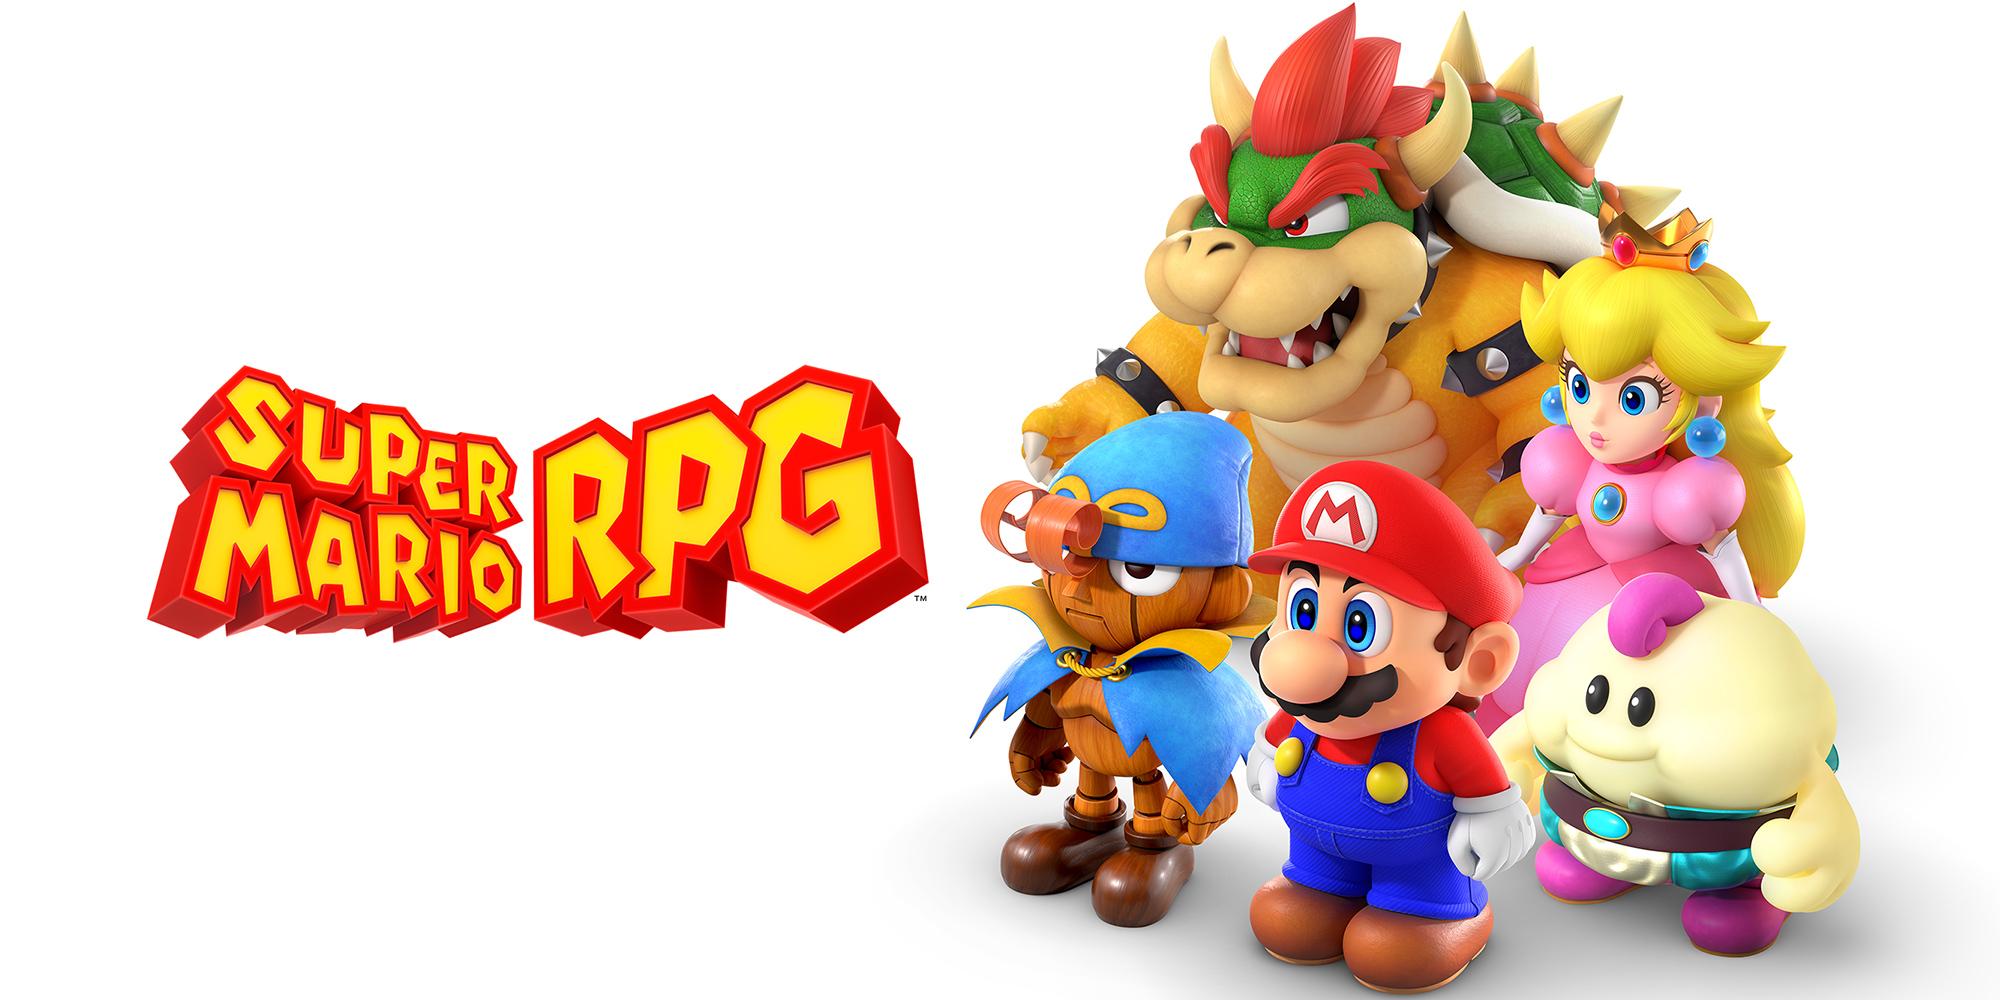 Super Mario RPG game release date, news & gameplay Currys